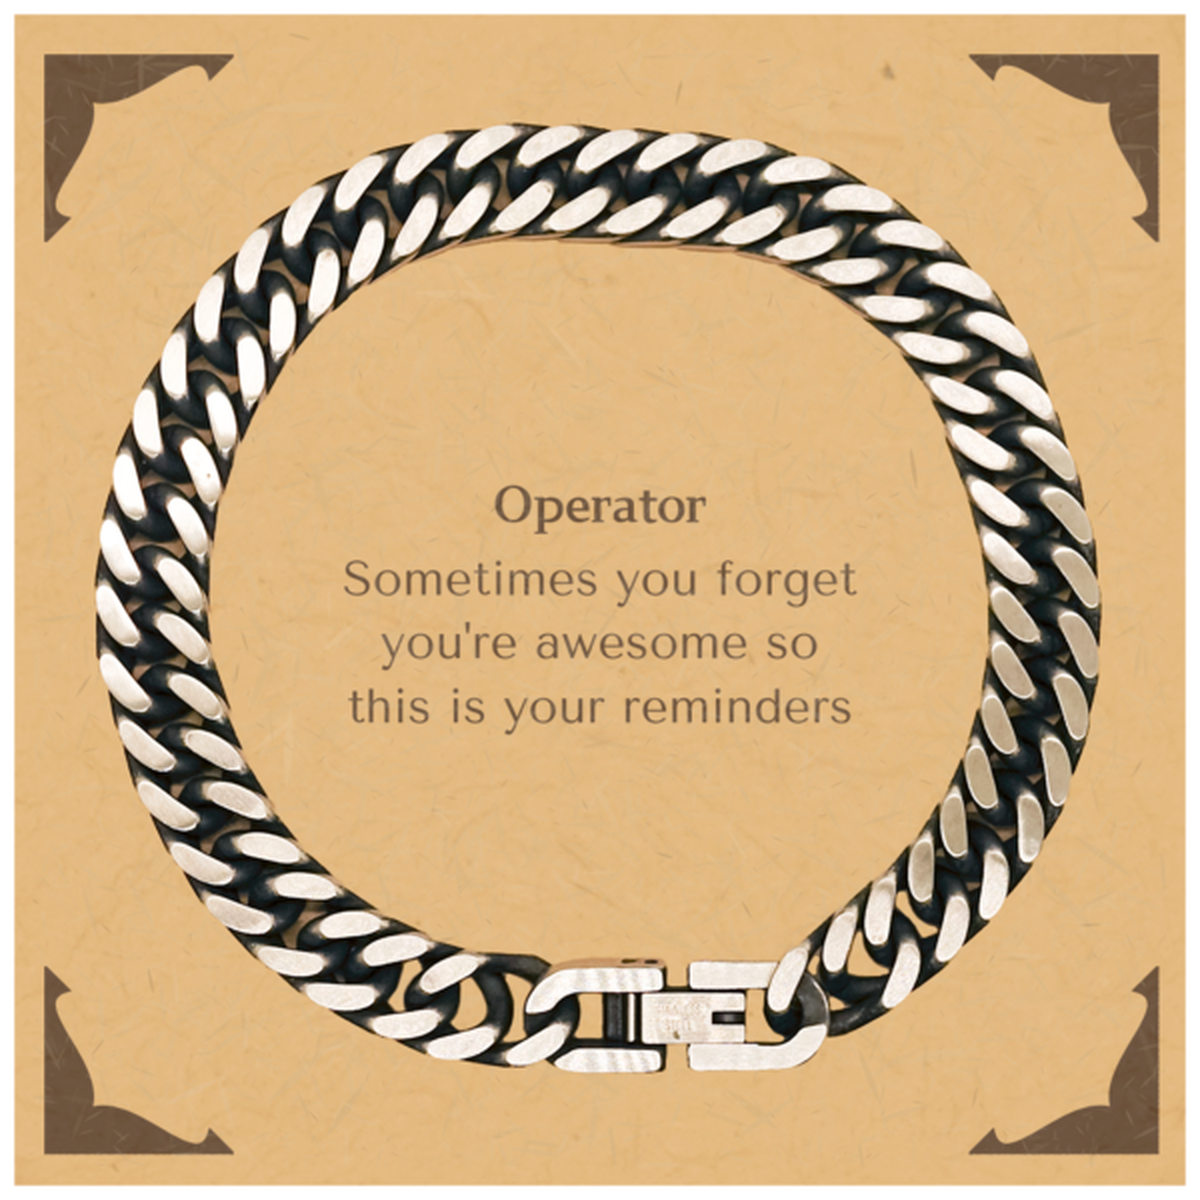 Sentimental Operator Cuban Link Chain Bracelet, Operator Sometimes you forget you're awesome so this is your reminders, Graduation Christmas Birthday Gifts for Operator, Men, Women, Coworkers